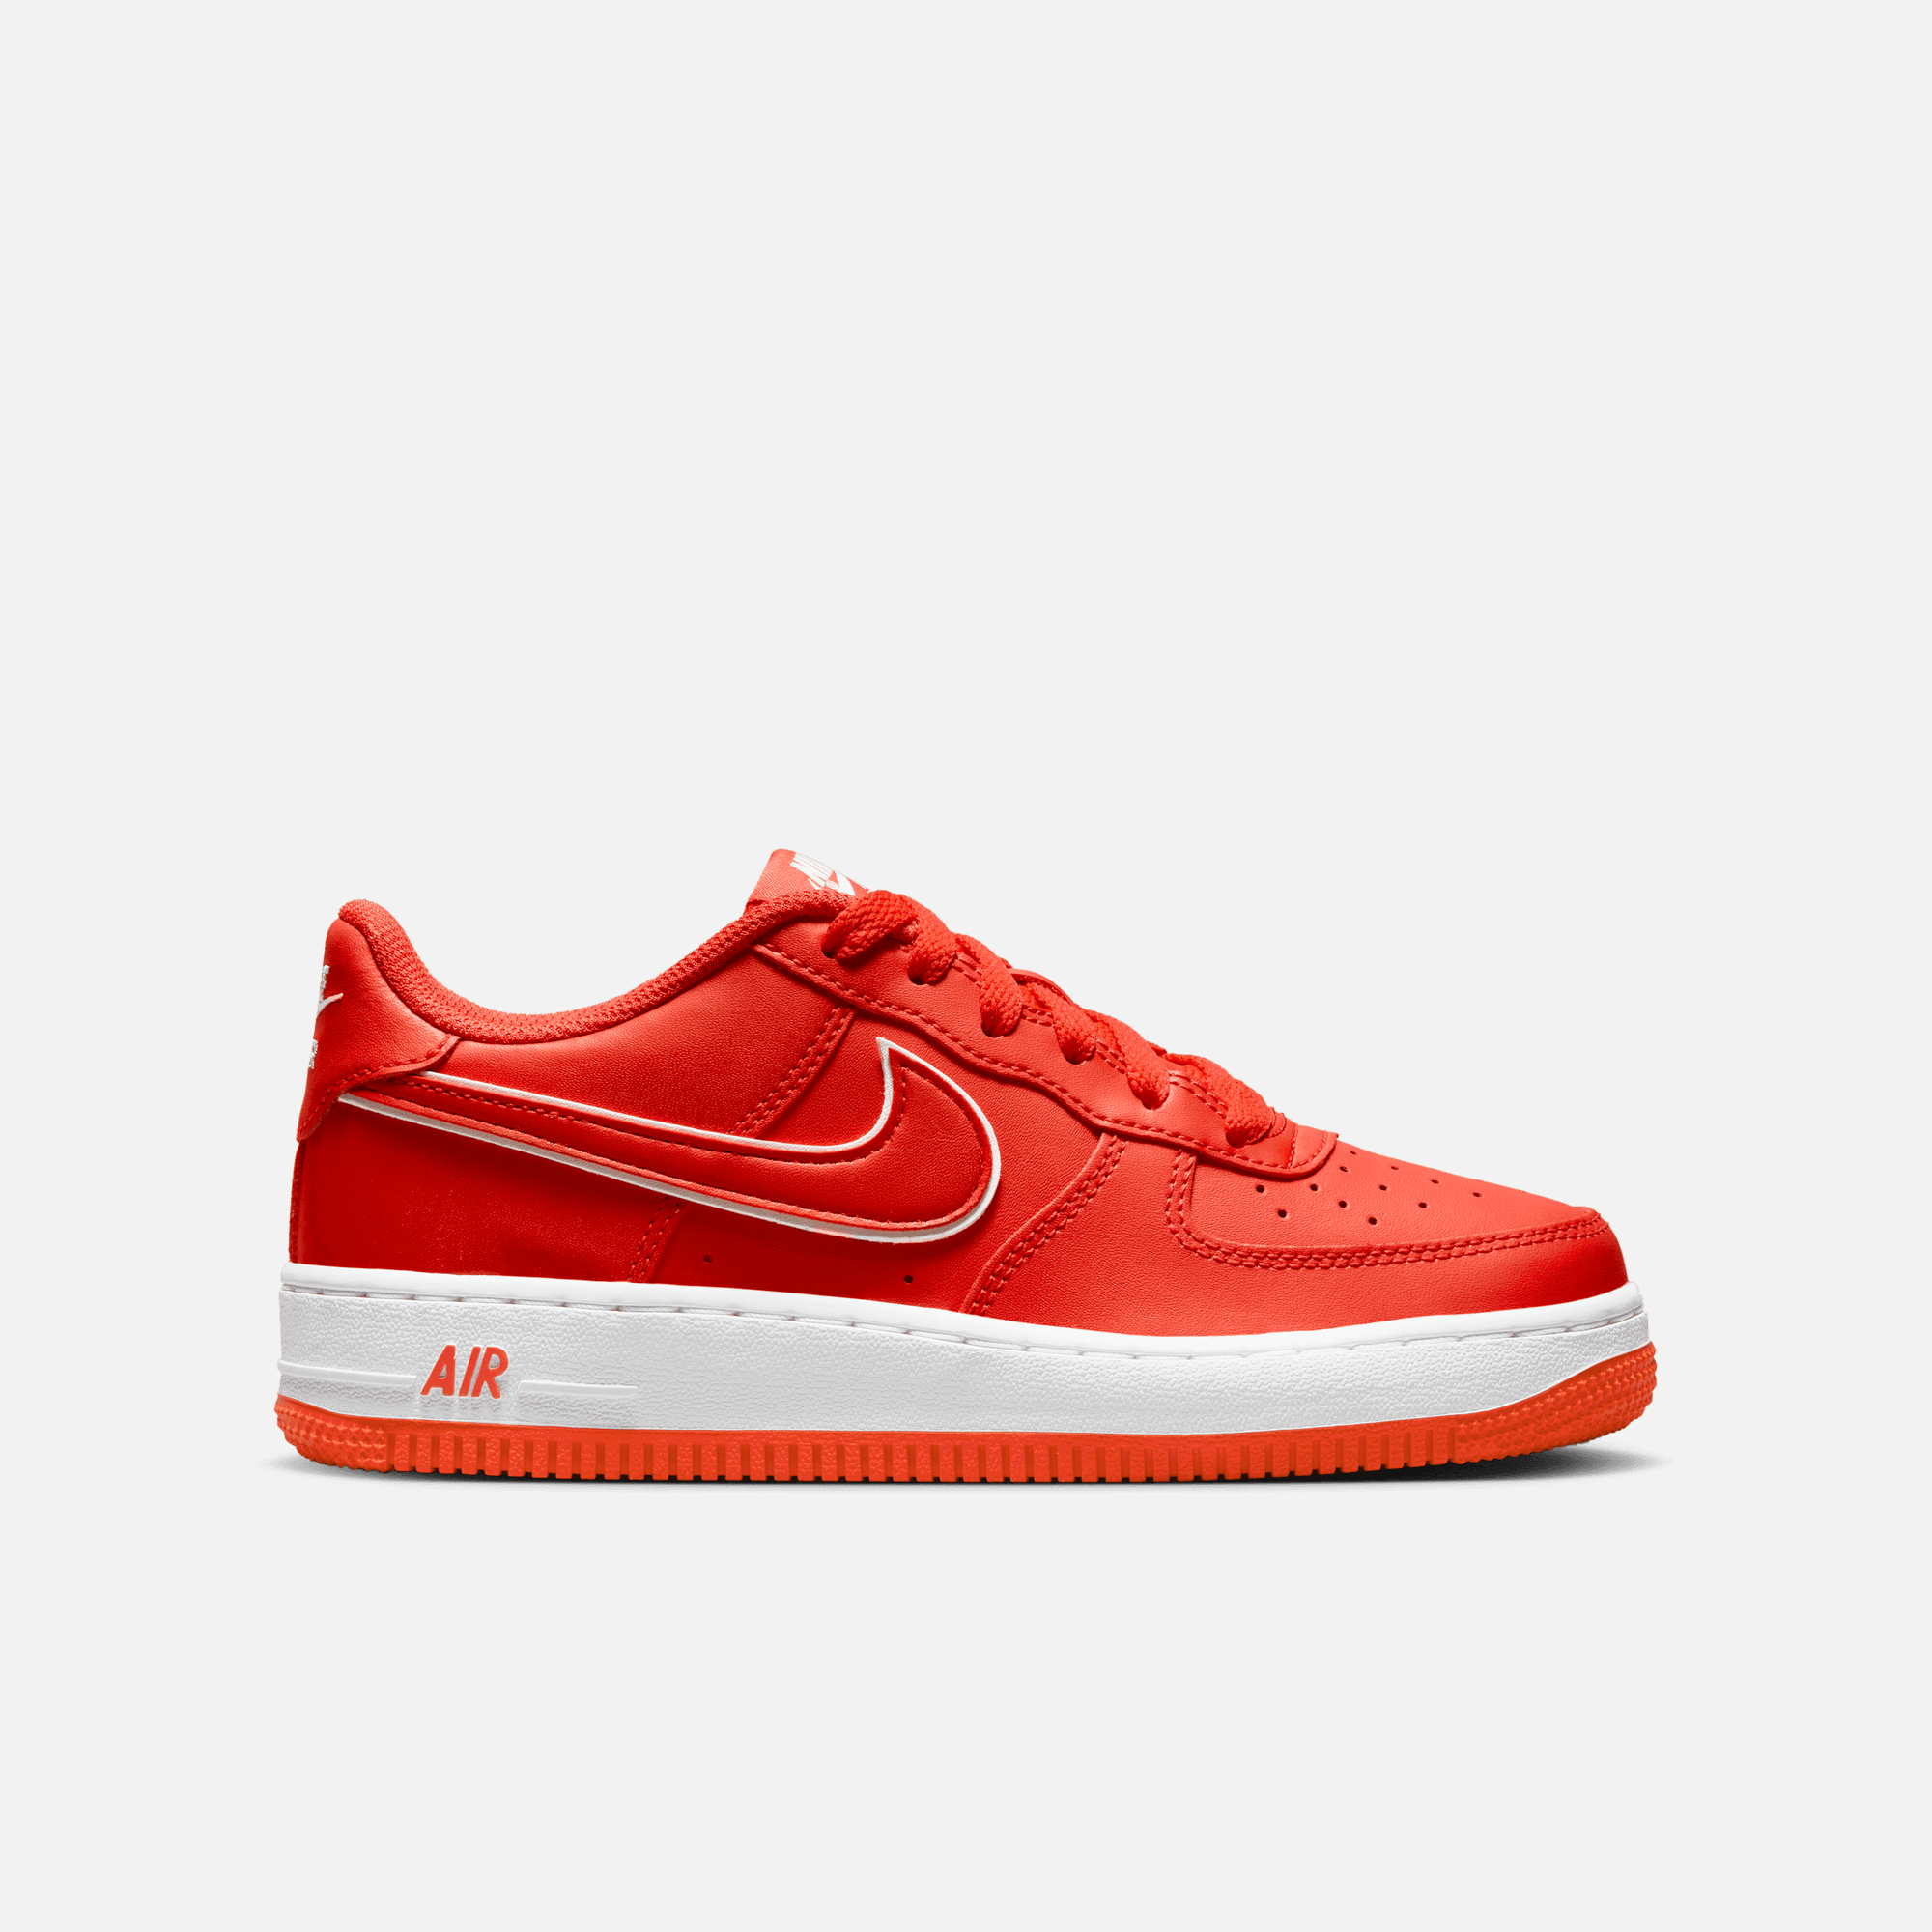 AIR FORCE 1 HIGH LV8 3 (GS) BIG KIDS US SIZE - 4 Y